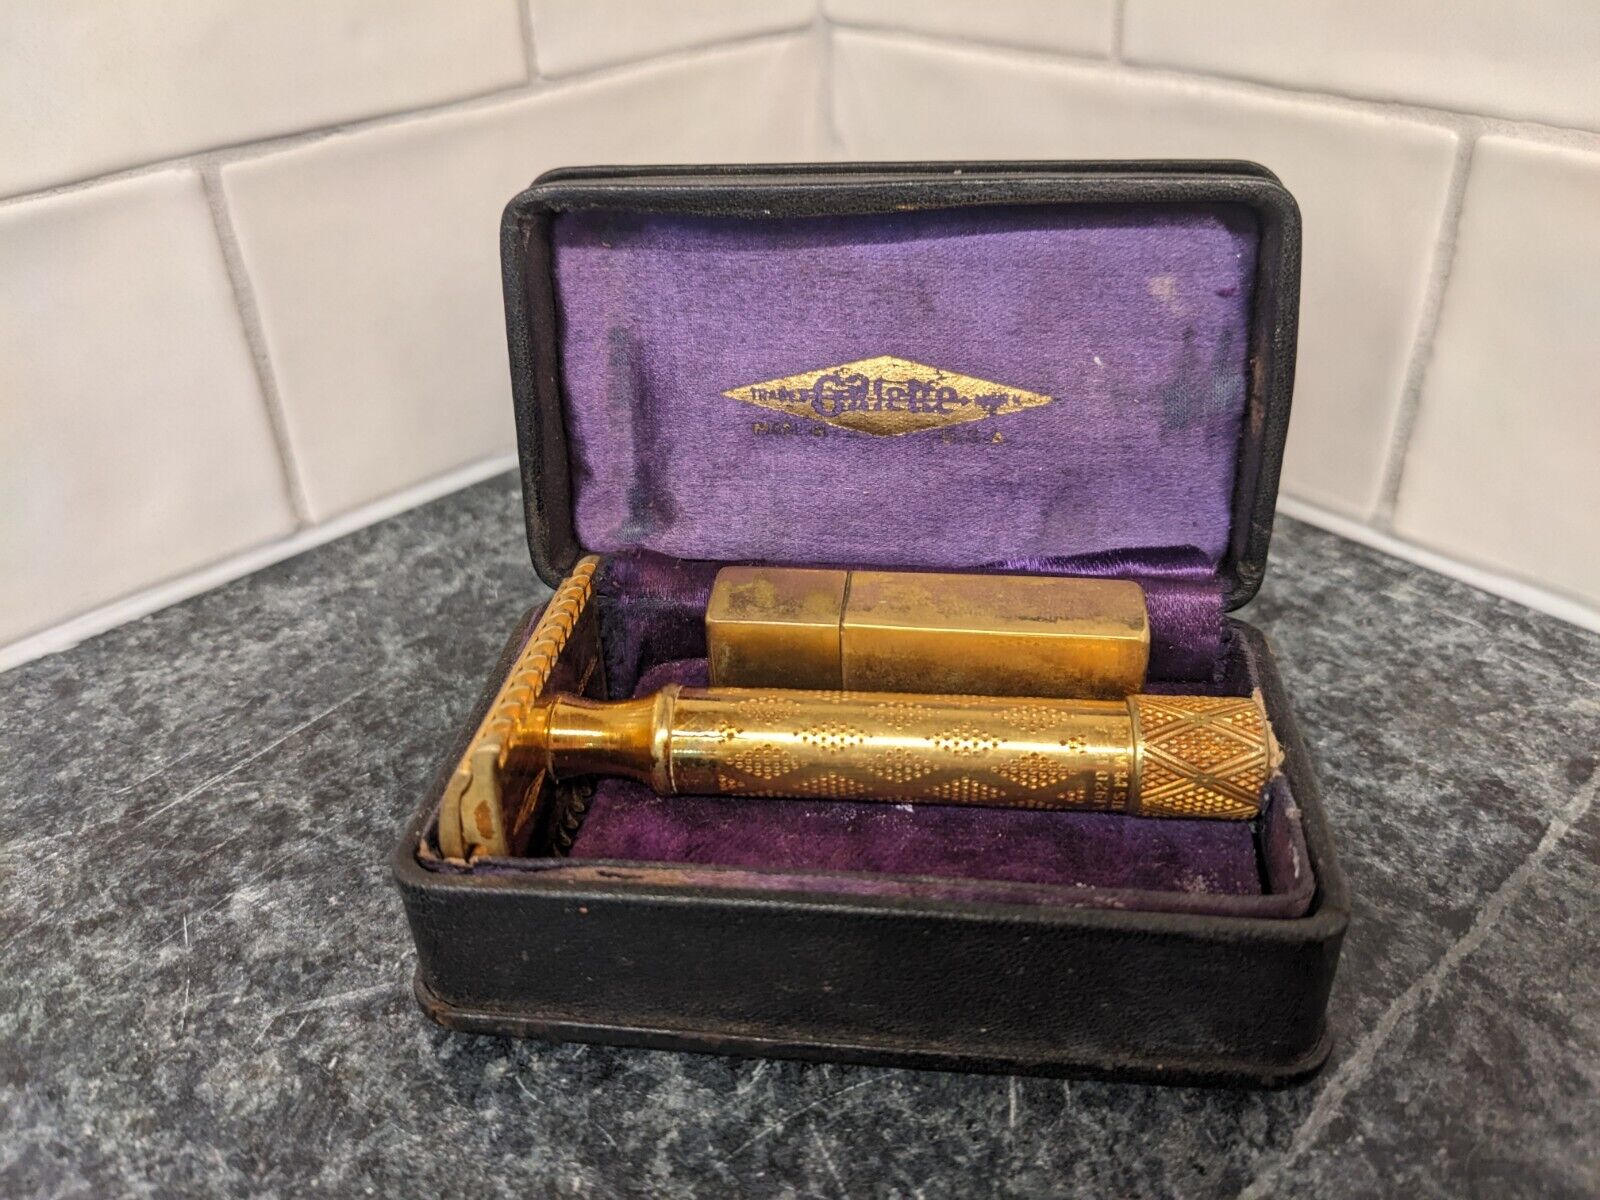 Gillette NEW DeLuxe Gold - Vintage Double Edge Safety Razor